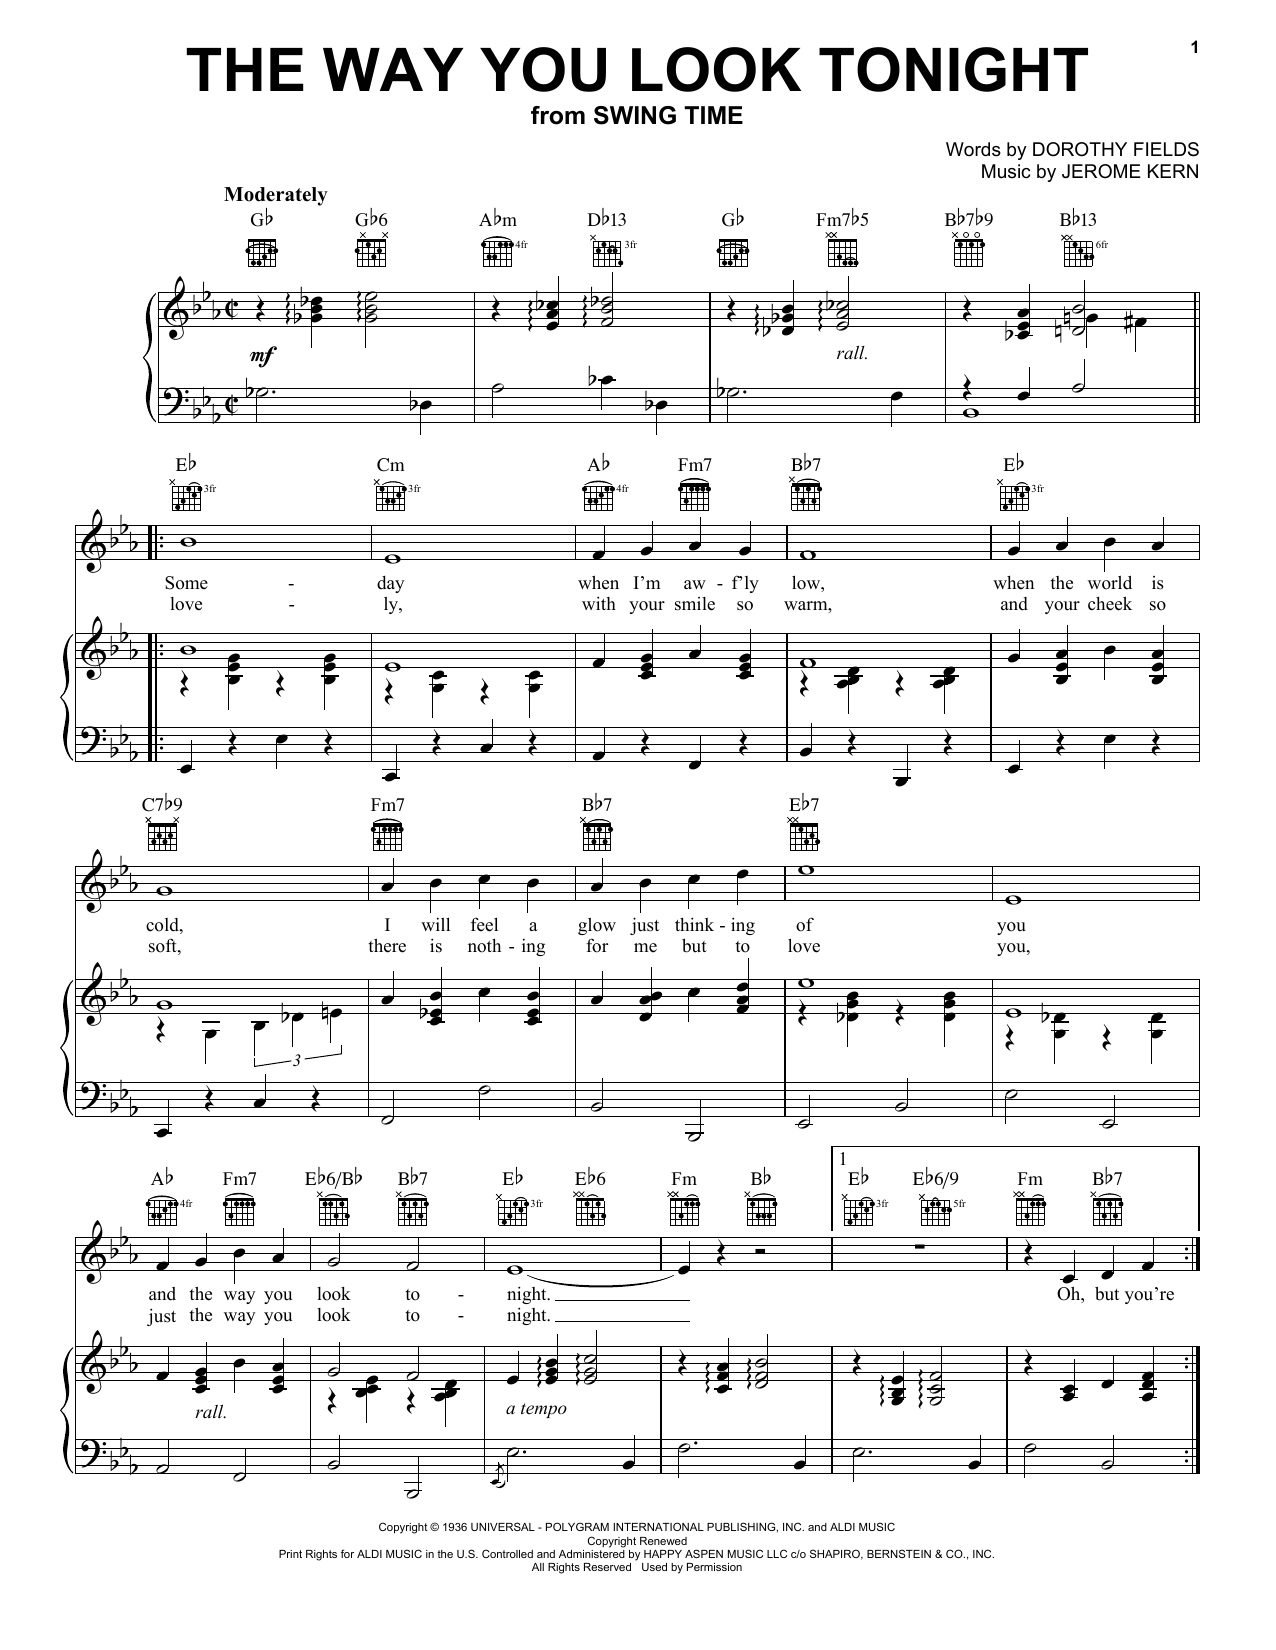 Download Frank Sinatra The Way You Look Tonight sheet music notes and chords for Beginner Piano - Download Printable PDF and start playing in minutes.